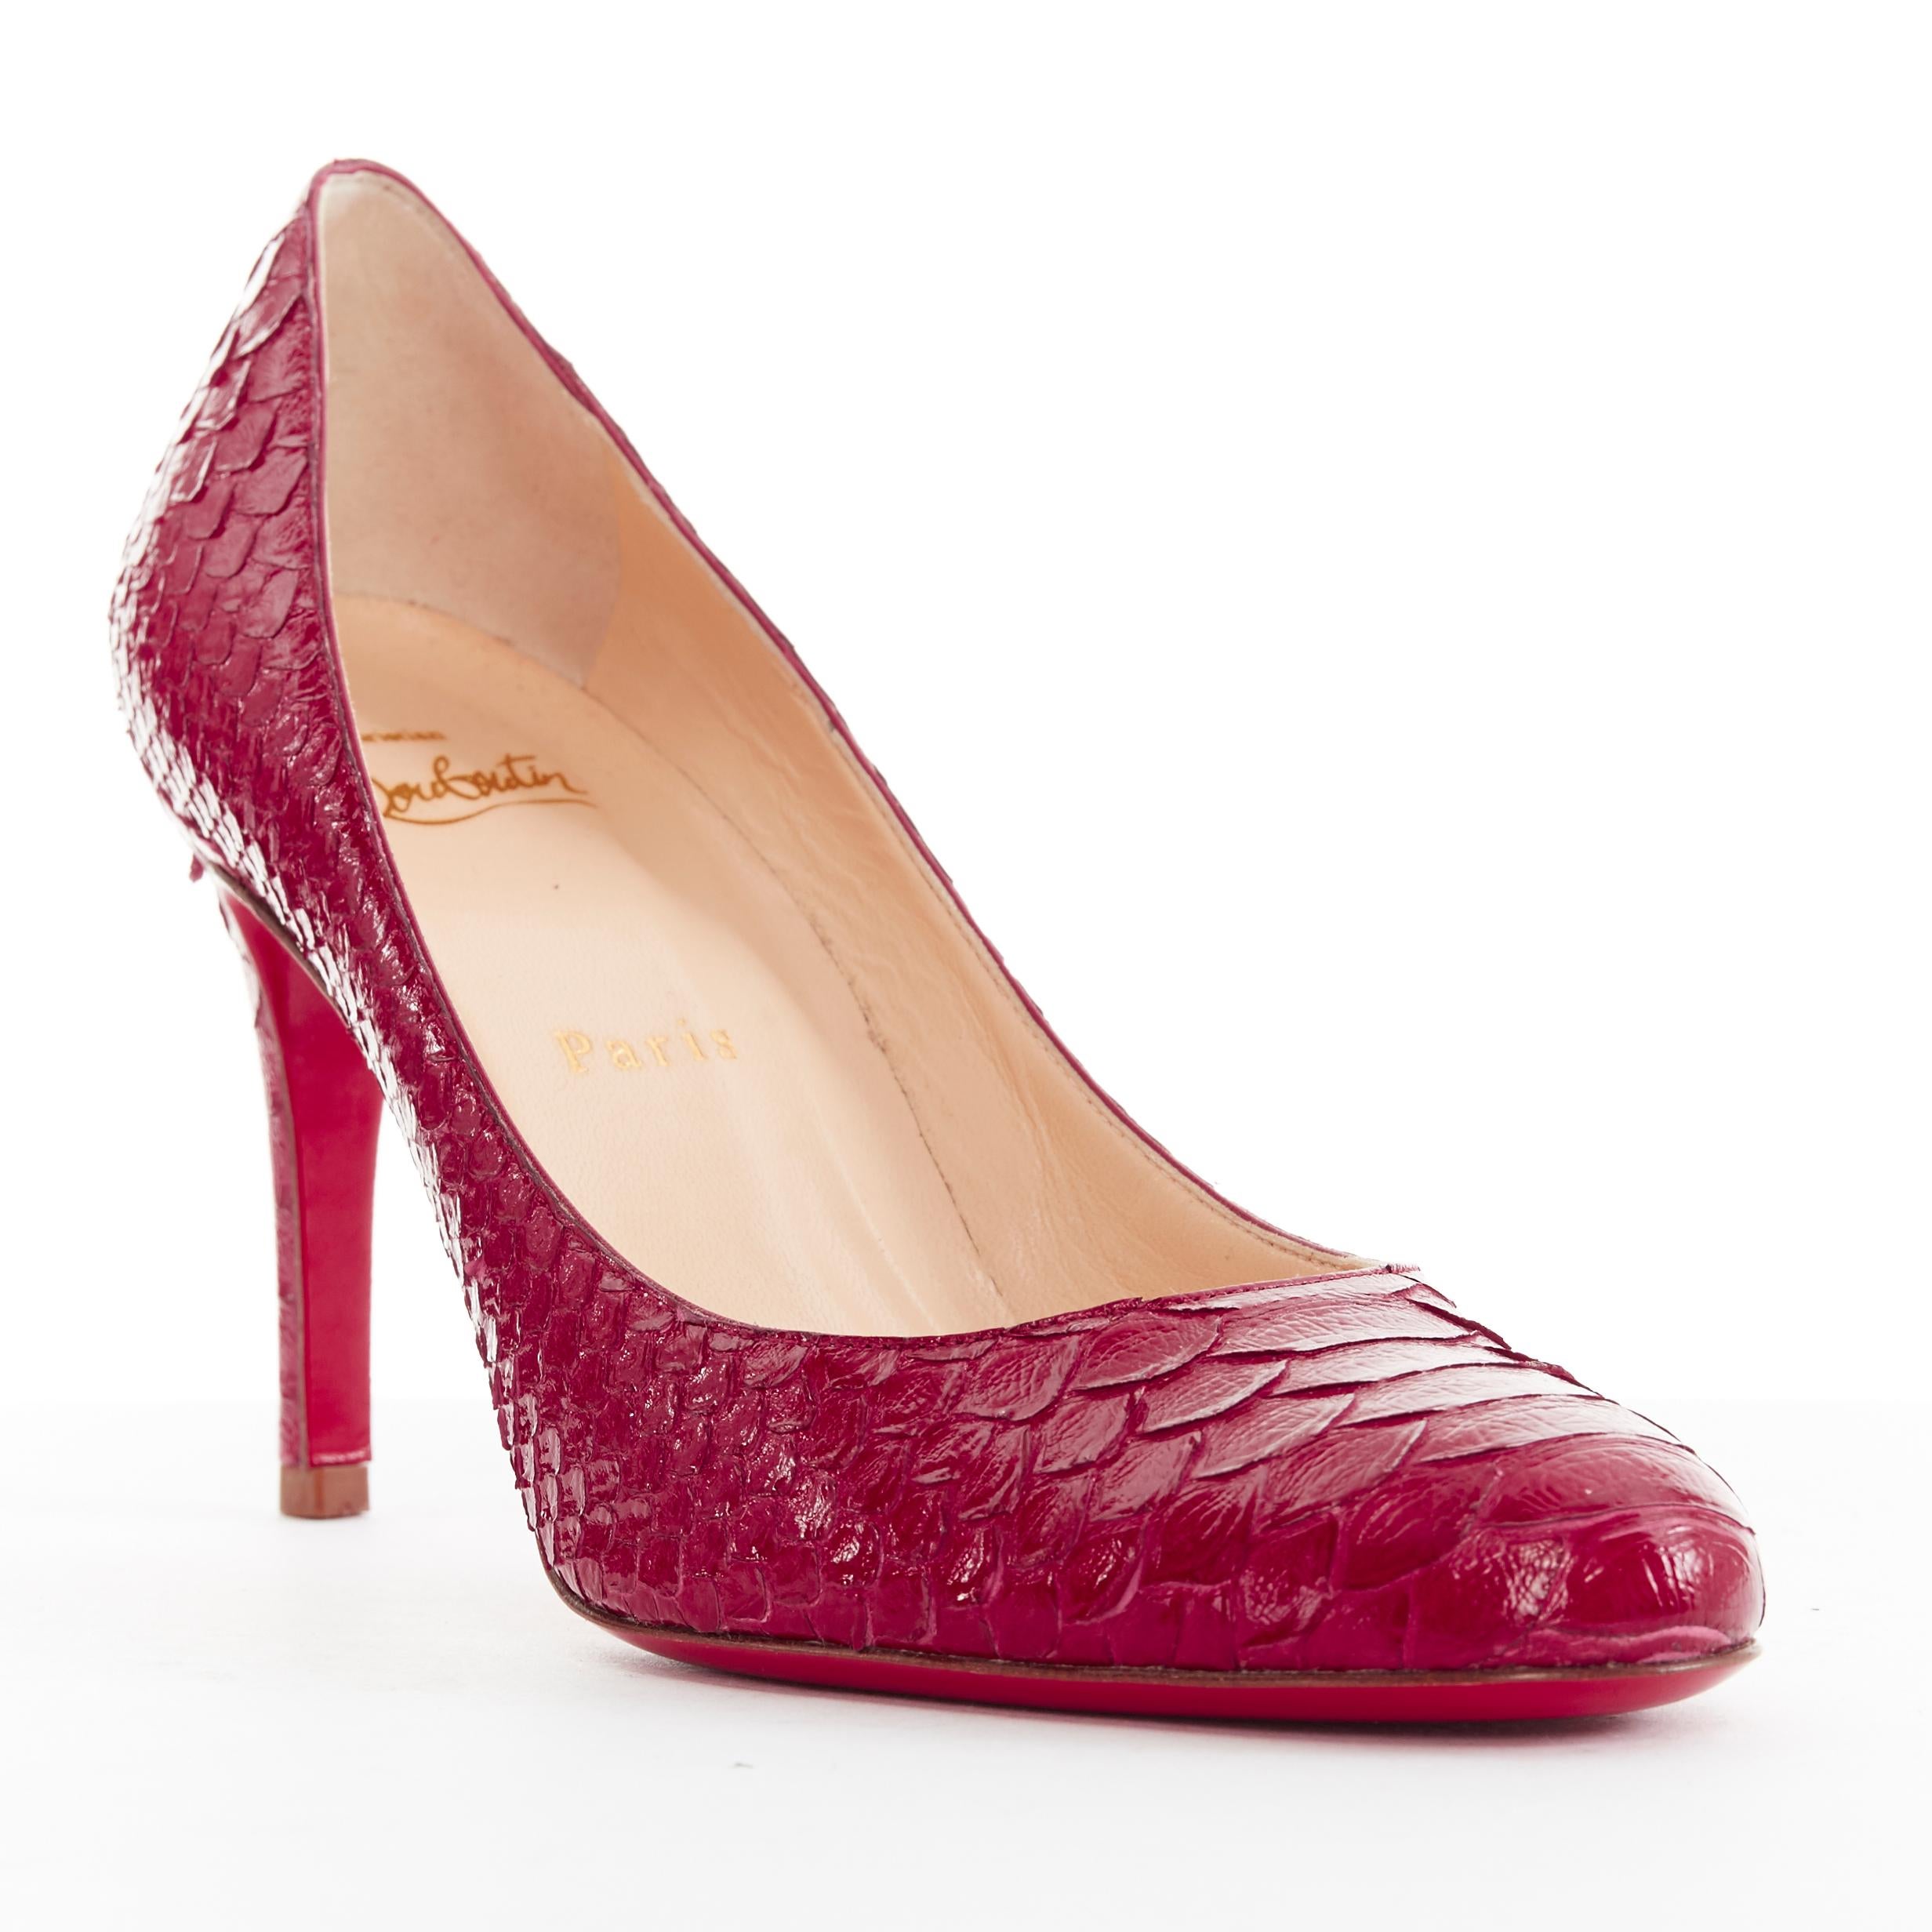 CHRISTIAN LOUBOUTIN Miss Gena 85 red glossy scaled leather round toe pump EU36.5 
Reference: TGAS/A02435 
Brand: Christian Louboutin 
Designer: Christian Louboutin 
Model: Miss Gena 85 
Material: Leather 
Color: Red 
Pattern: Solid 
Extra Detail: